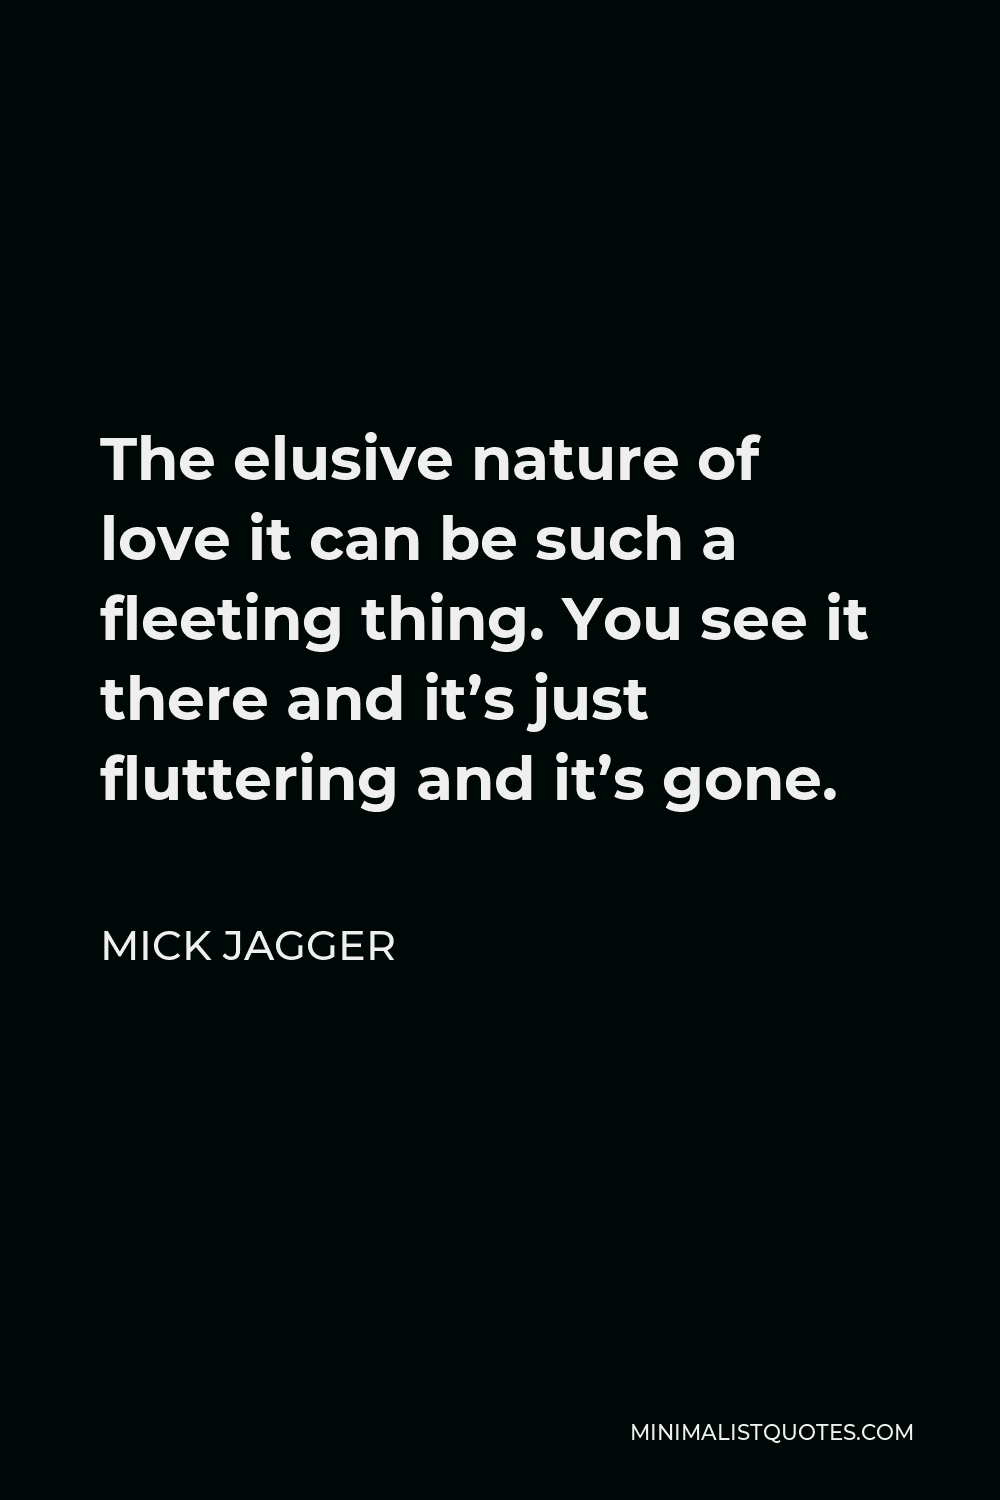 Mick Jagger Quote - The elusive nature of love it can be such a fleeting thing. You see it there and it’s just fluttering and it’s gone.